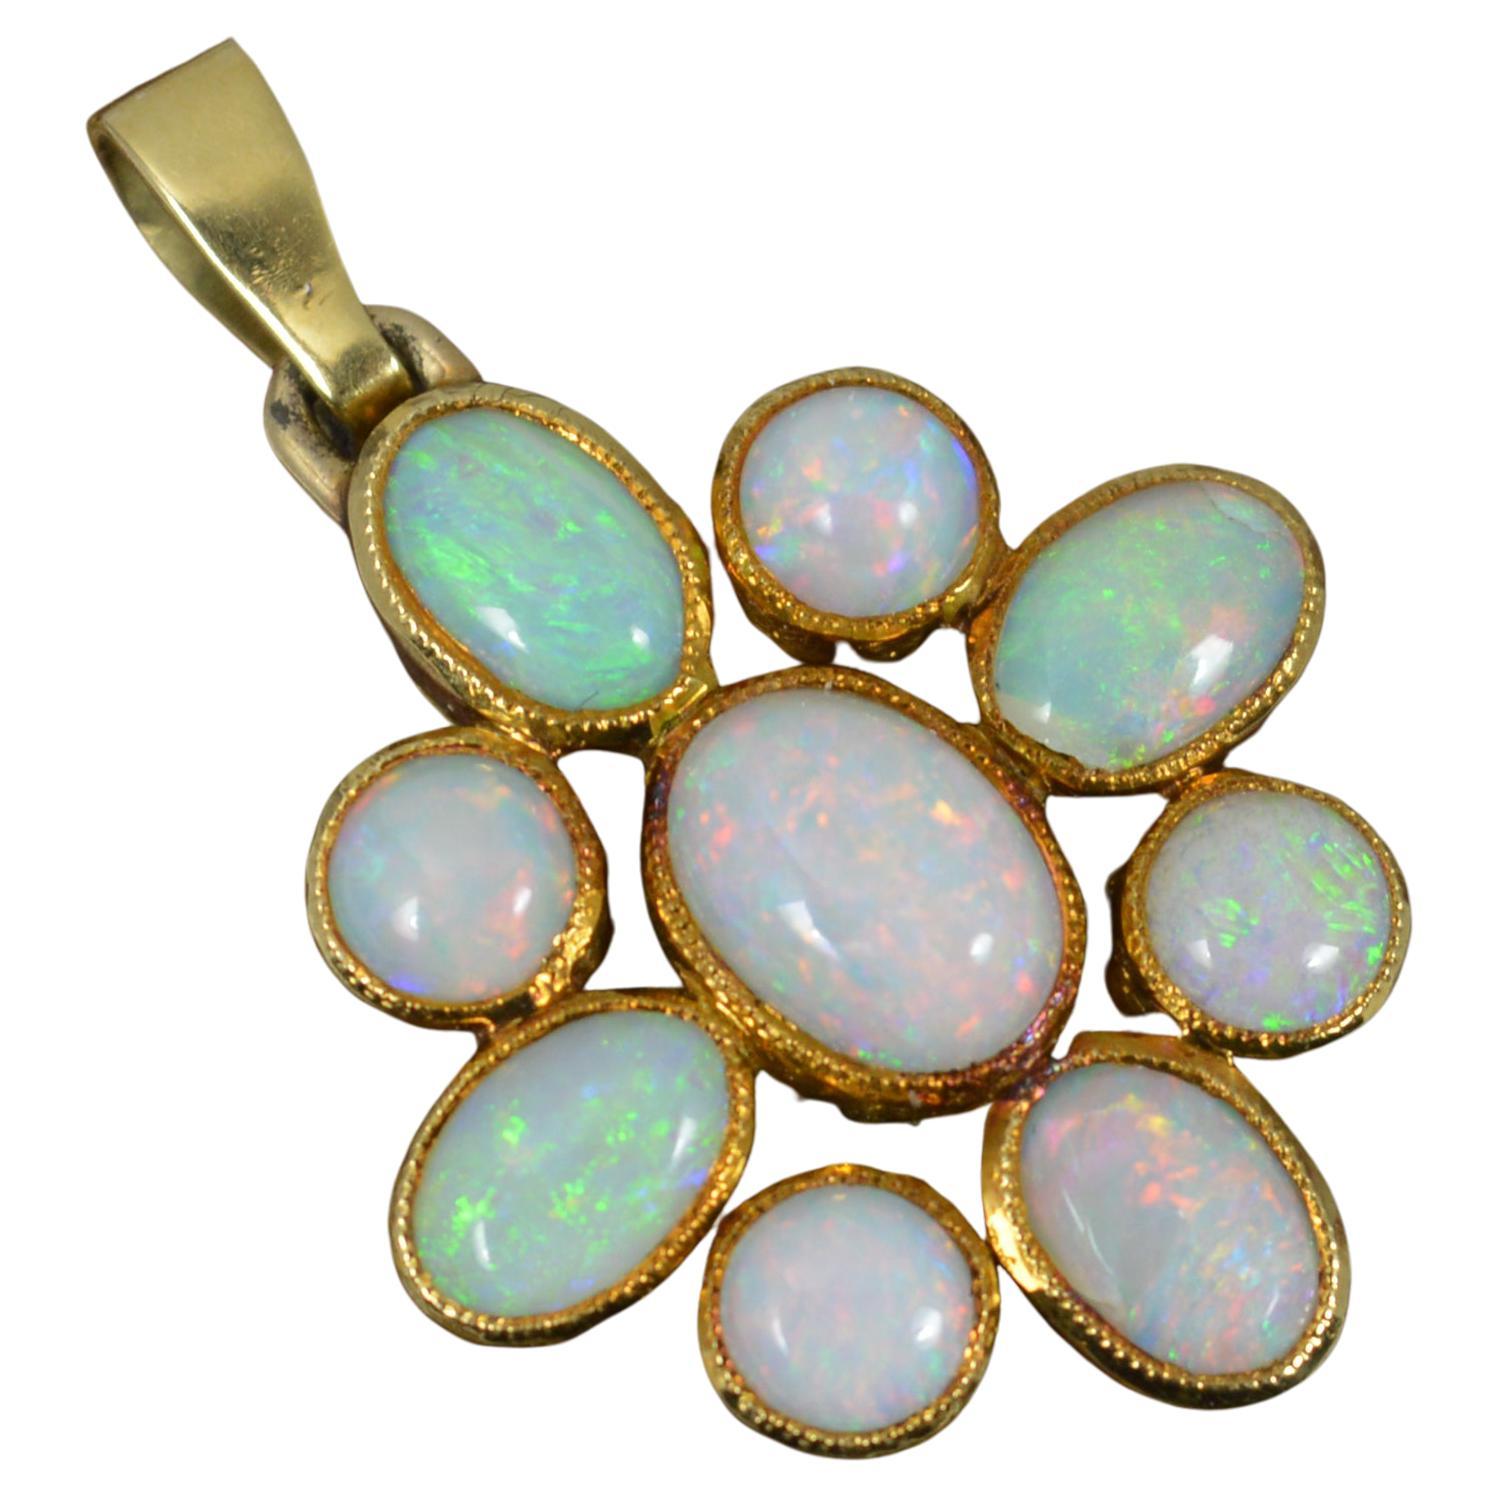 Beautiful 14 Carat Gold and Colourful Natural Opal Pendant